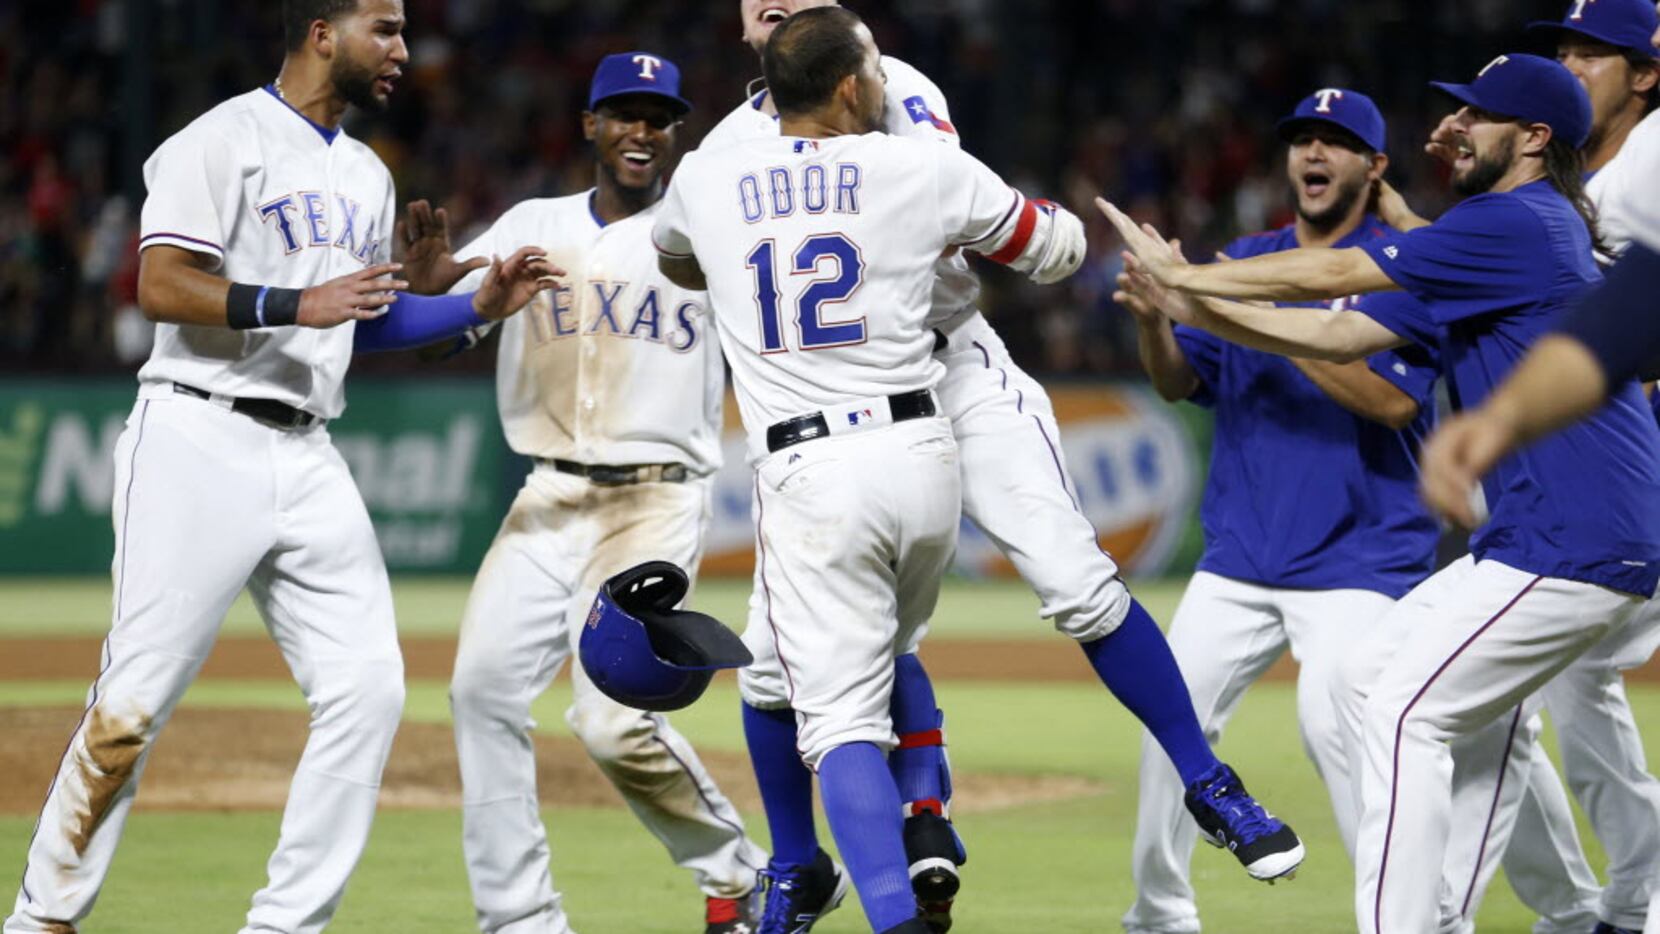 Texas Rangers second baseman Rougned Odor (12) celebrates with teammates after scoring on a...